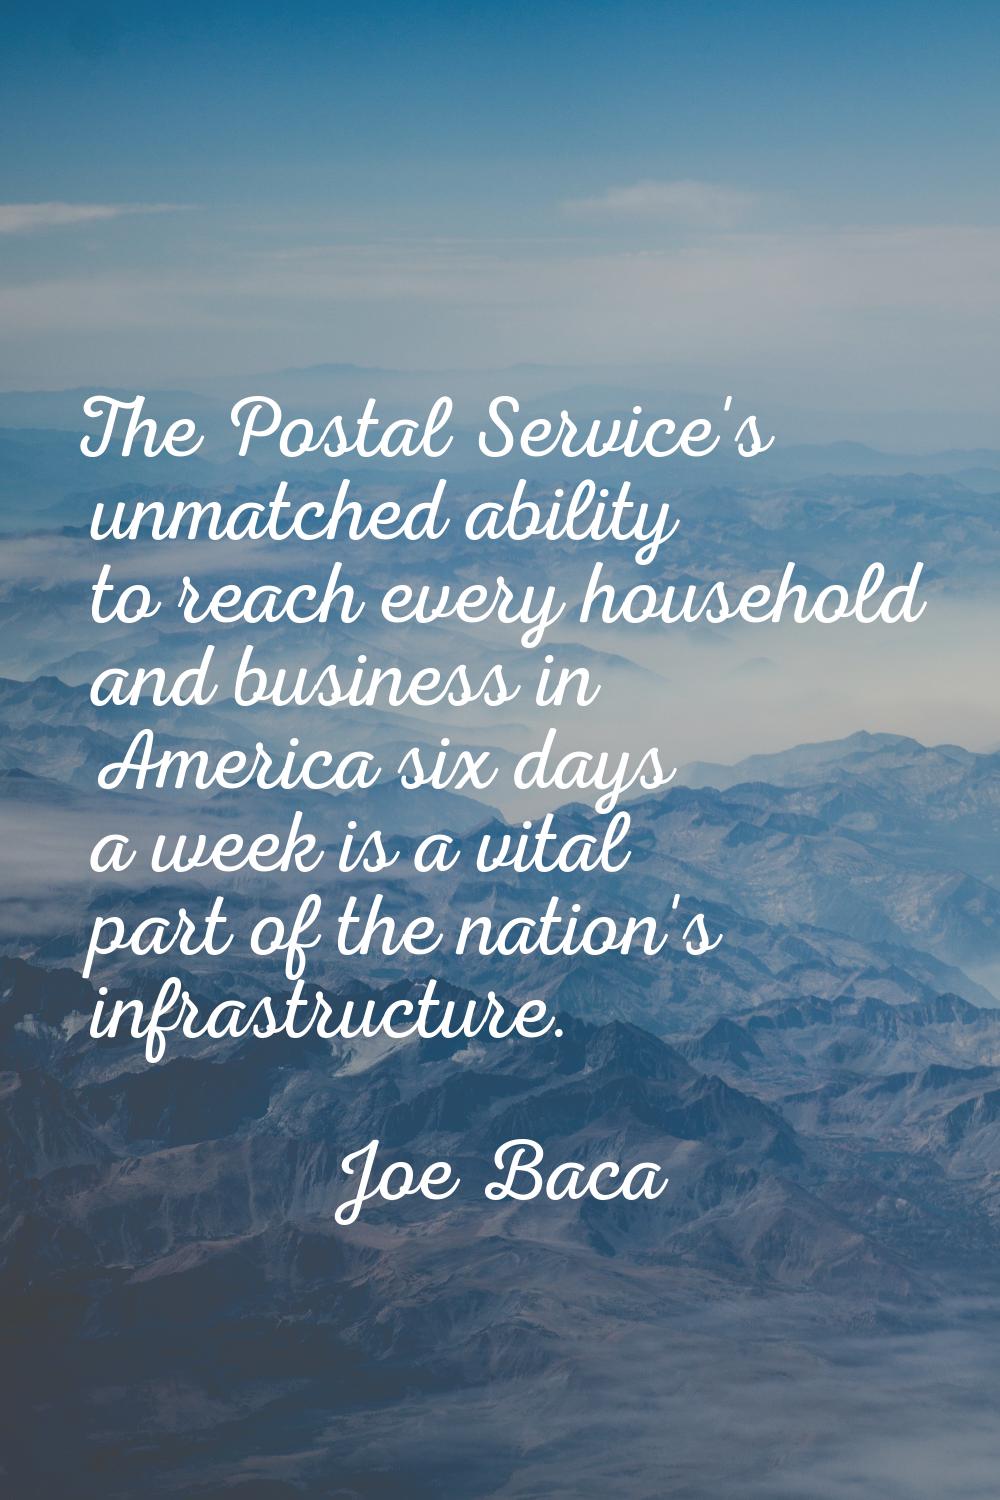 The Postal Service's unmatched ability to reach every household and business in America six days a 